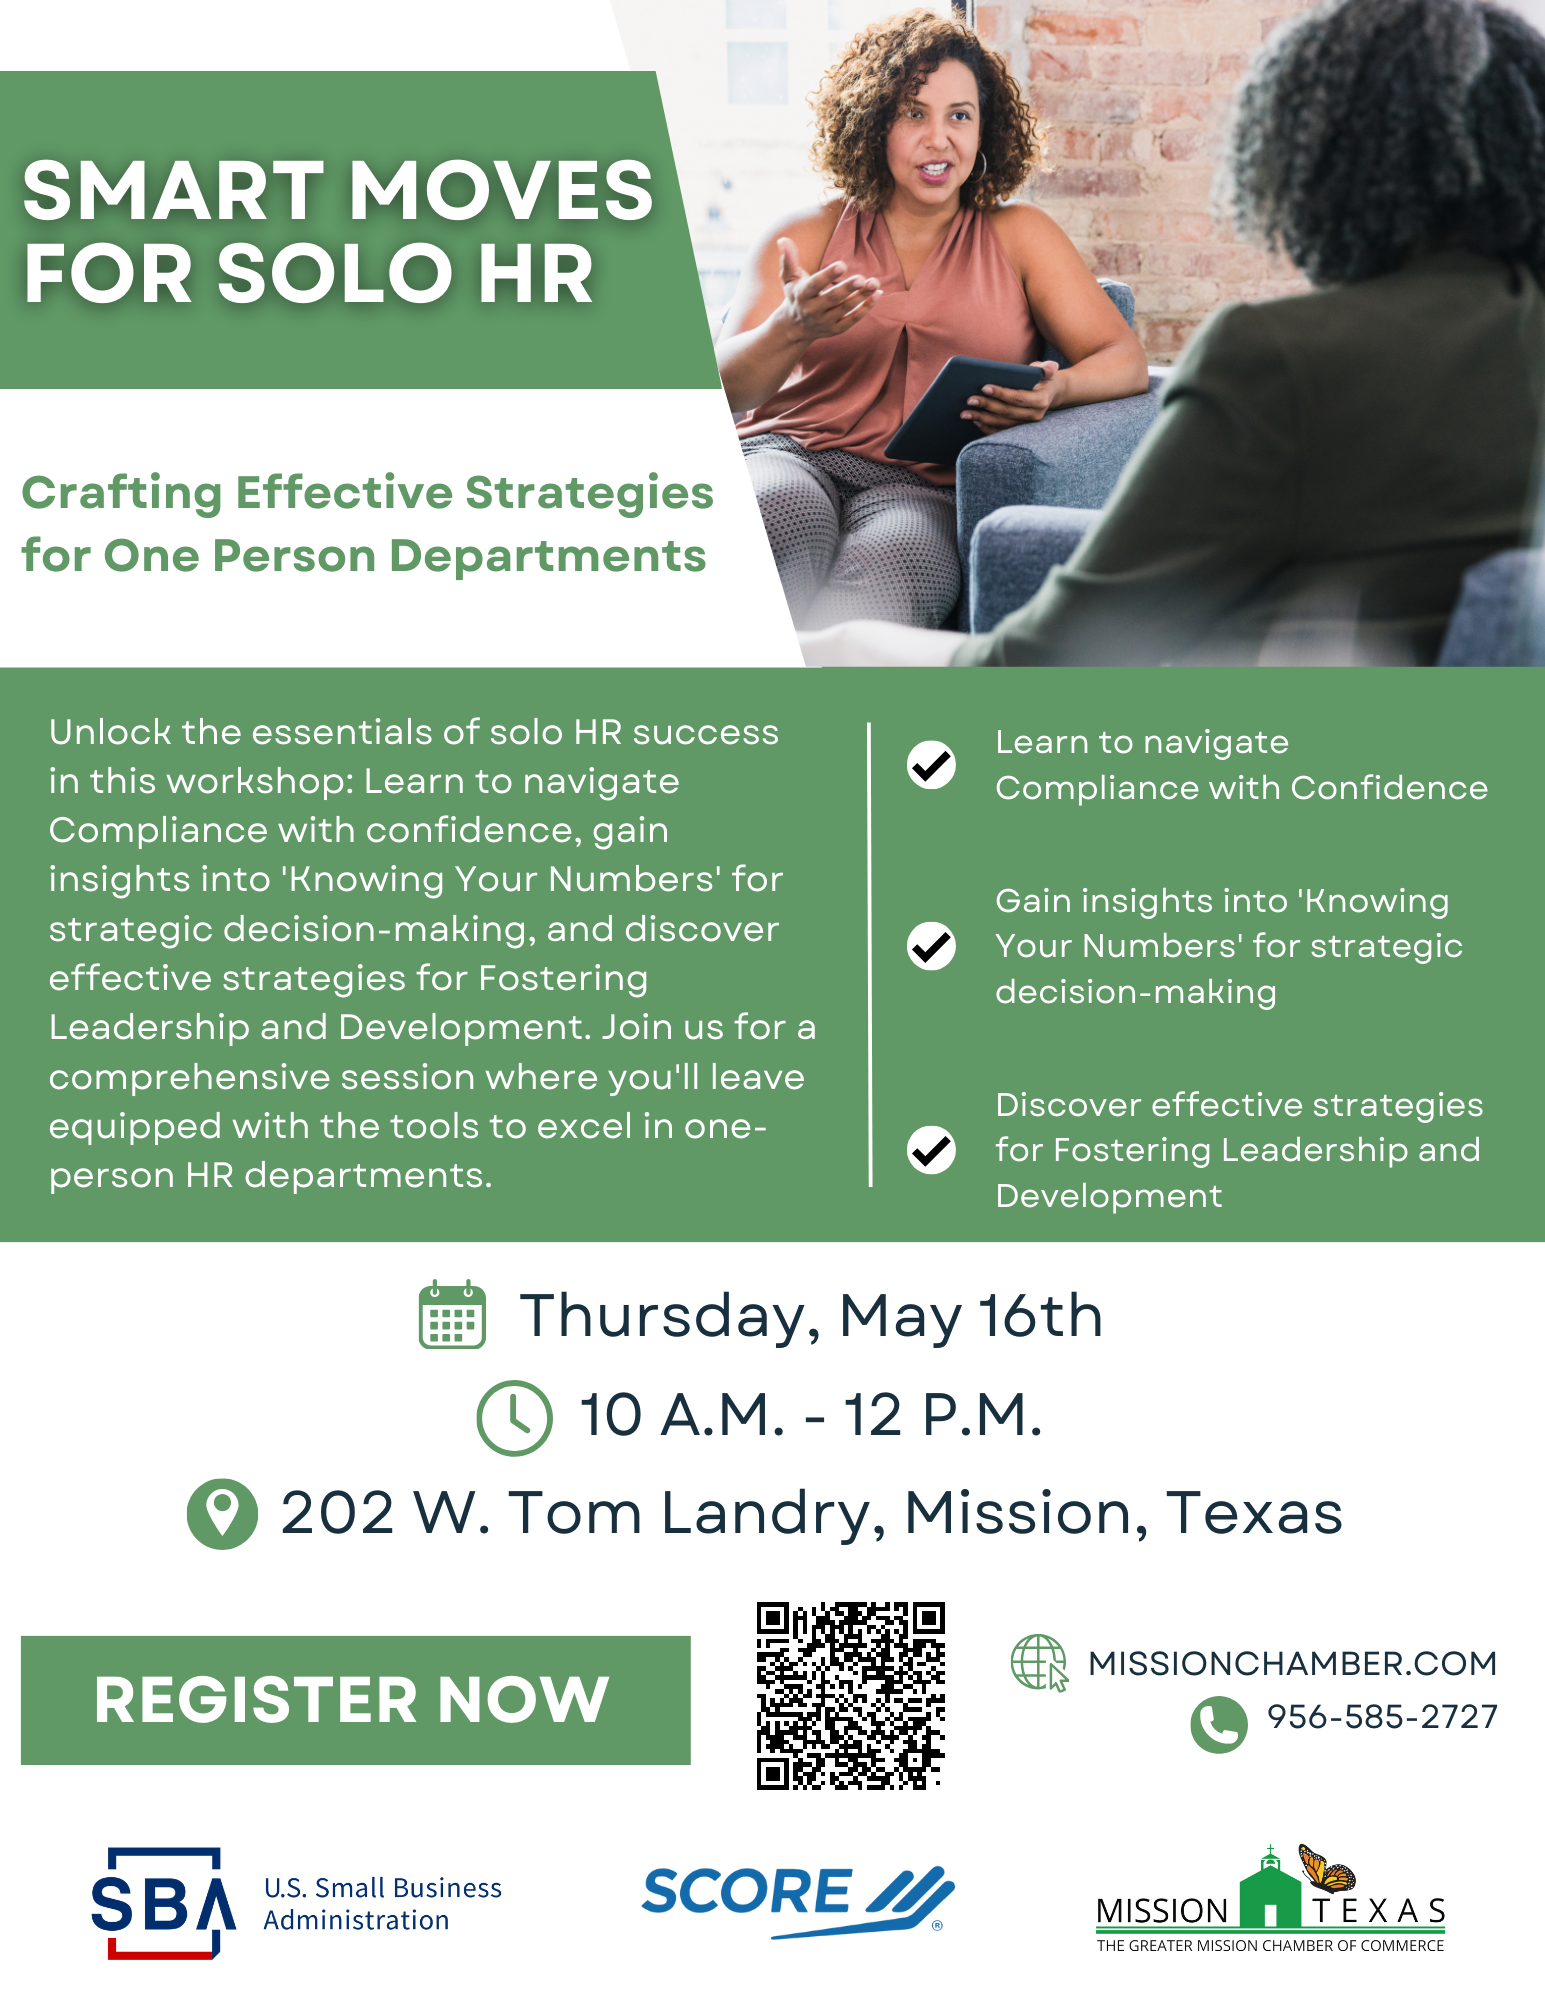 Smart Moves for Solo HR Seminar: Elevate Your HR Game